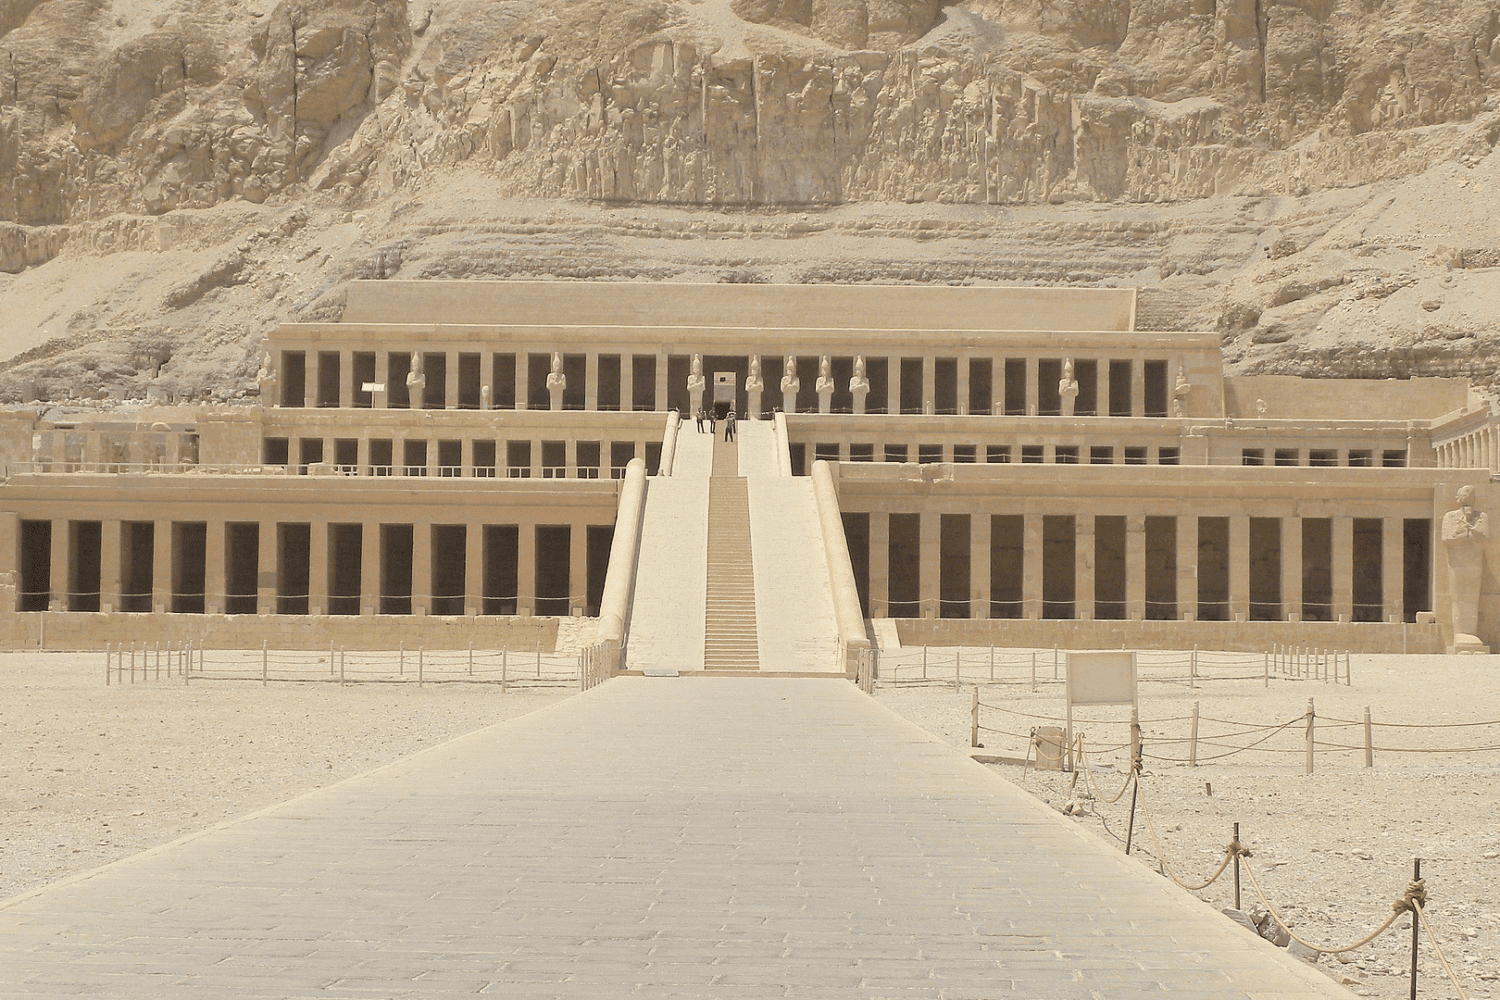 Mortuary Temple of Hatshepsut - Luxor | Ancient Egypt & The Red Sea Tour | Cruise the Nile in Style Tour | Egypt in the Golden Age of Travel Luxury Tour | Essential Egypt Tour | Luxury Tour of Egypt | The Magic of Jordan & Egypt Tour